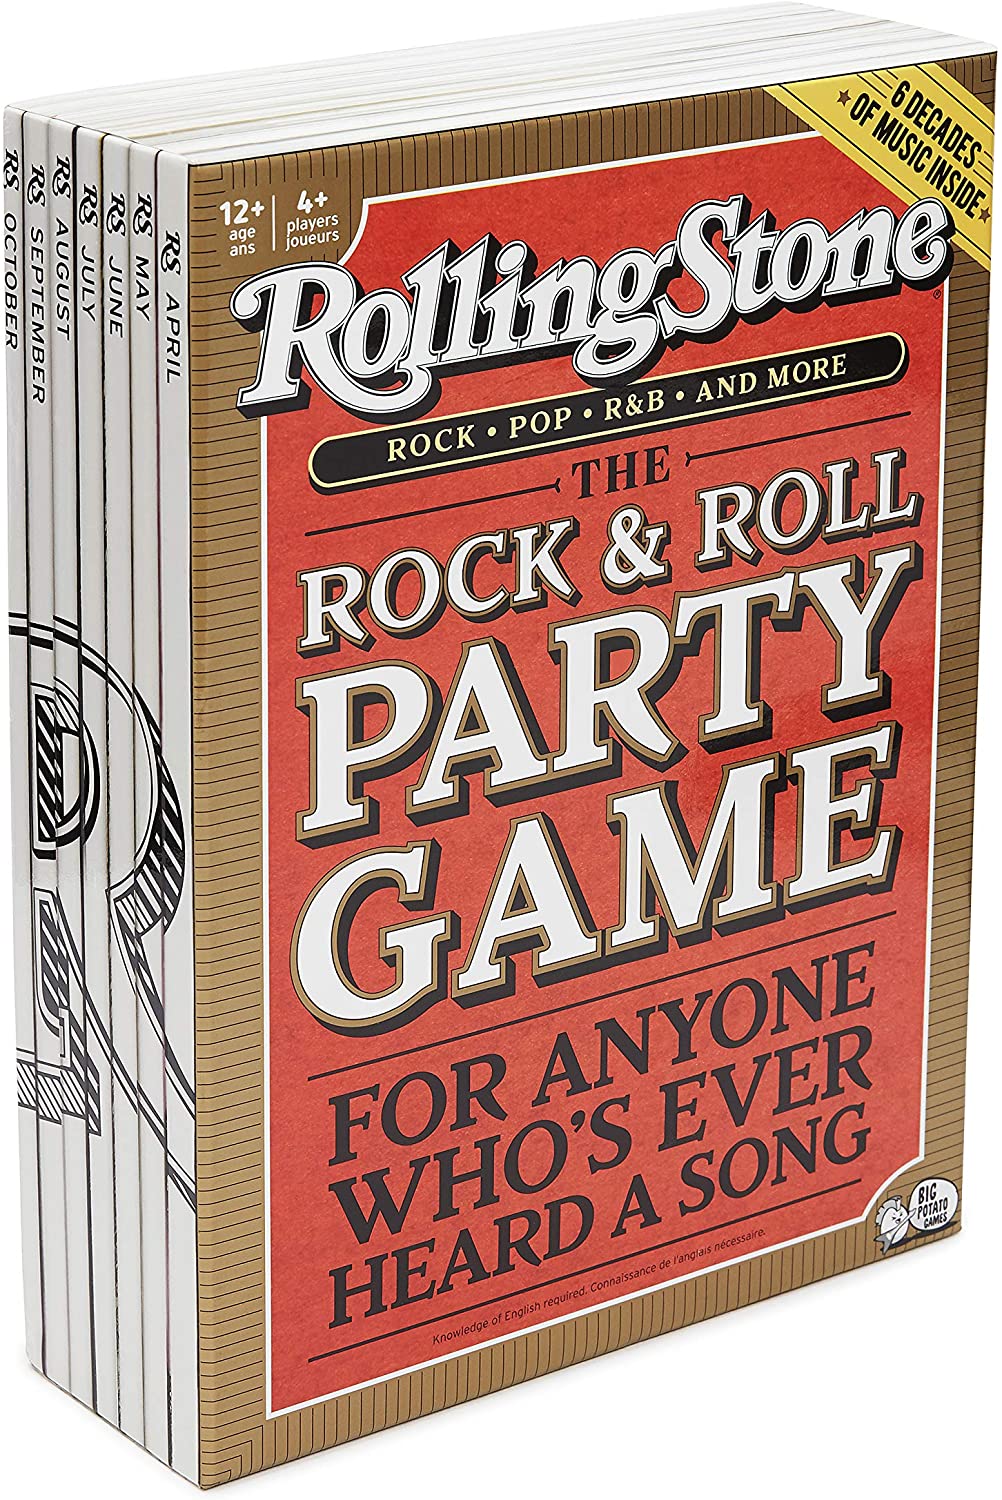 Big Potato Rolling Stone: The Music Trivia Game Where Legends are Made